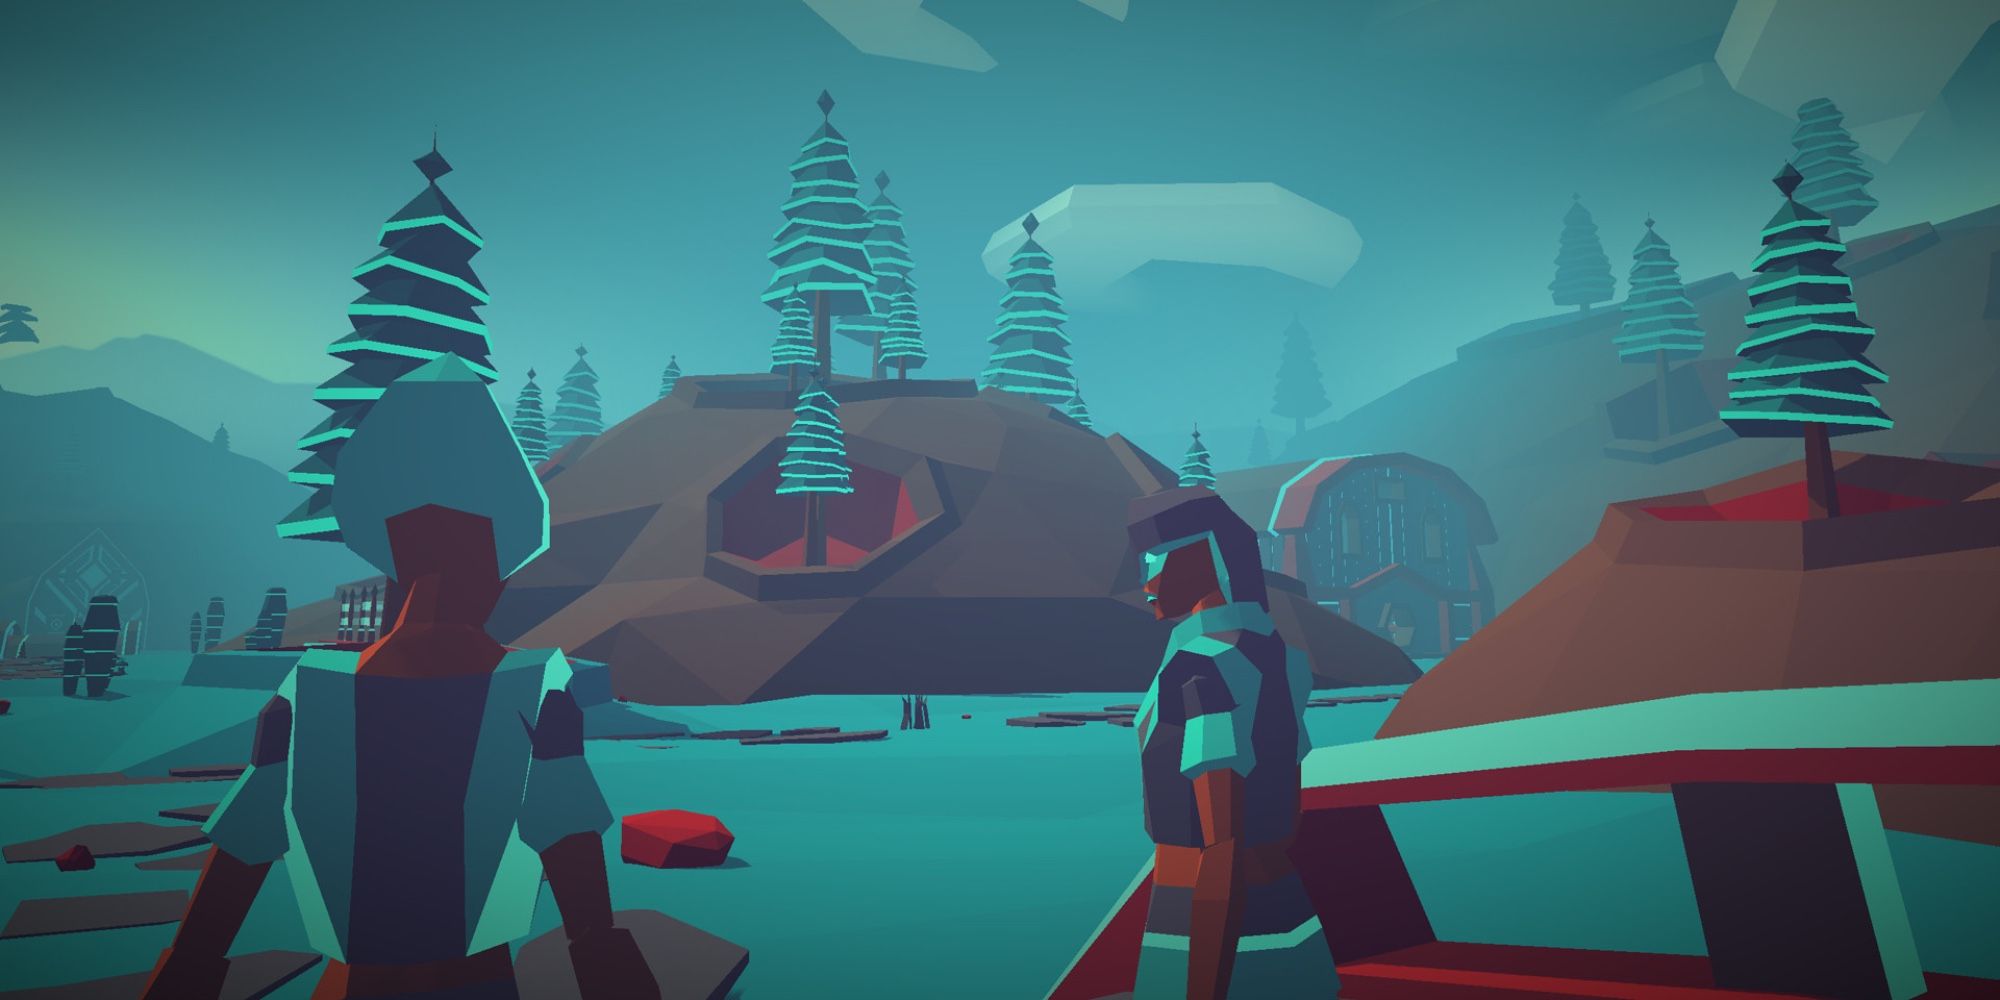 characters from morphite